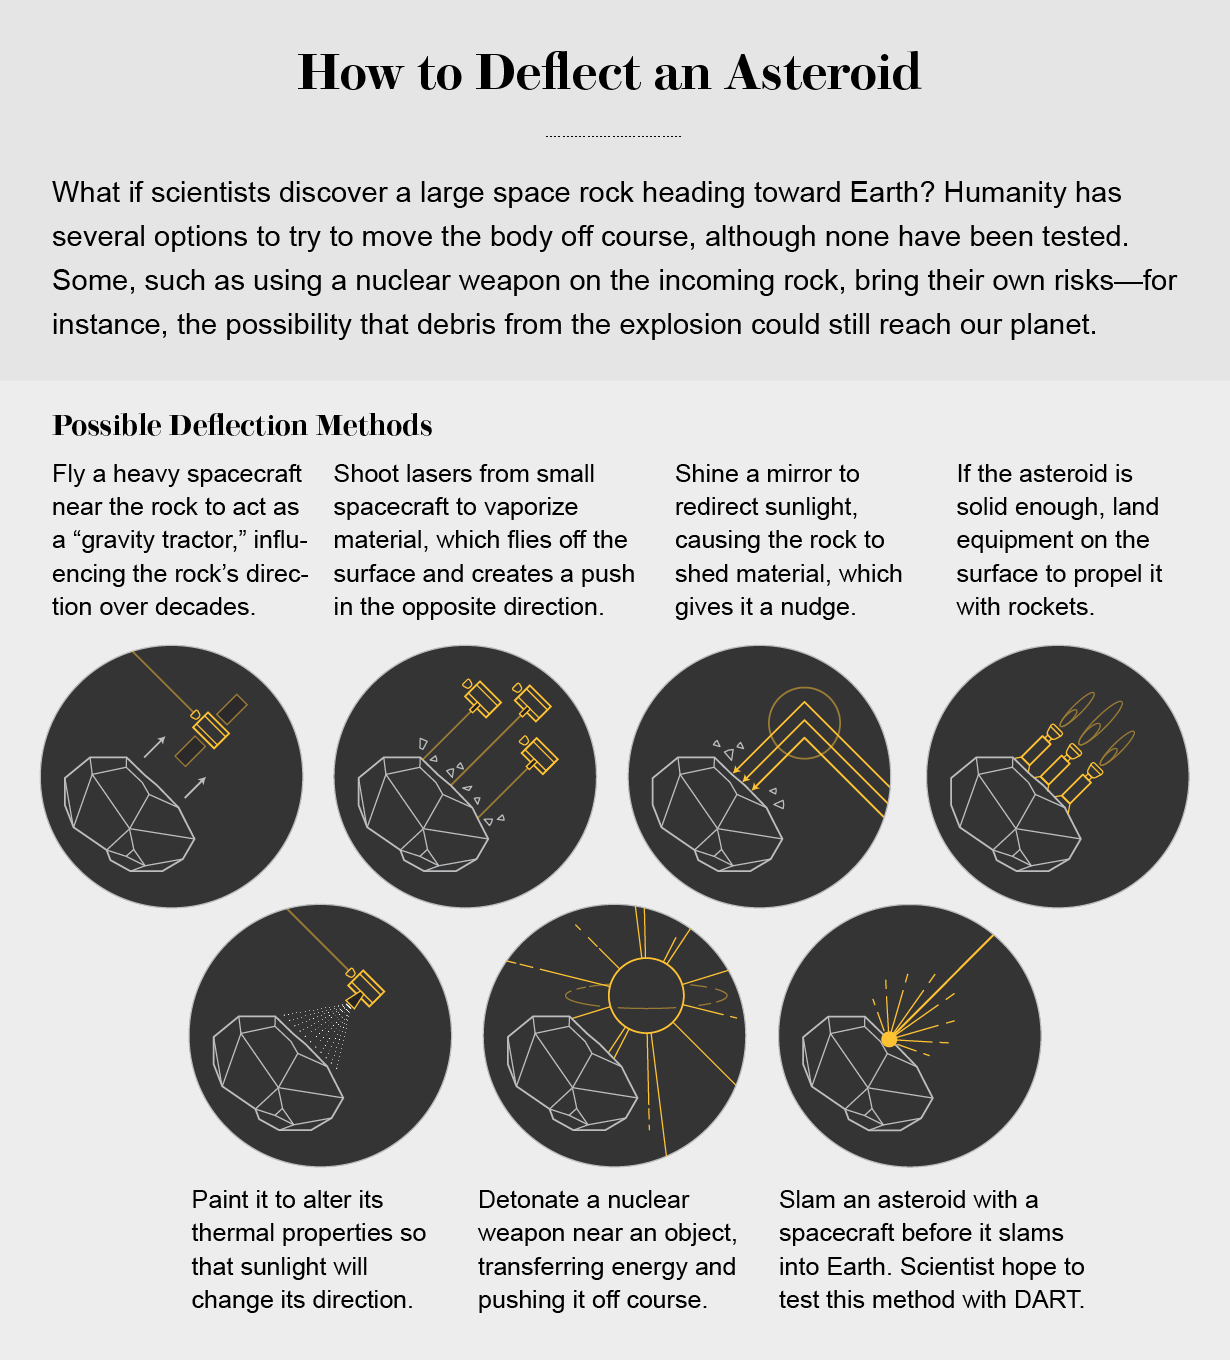 The graphic shows seven possible ways to deflect an asteroid, including the method employed by the DART mission.